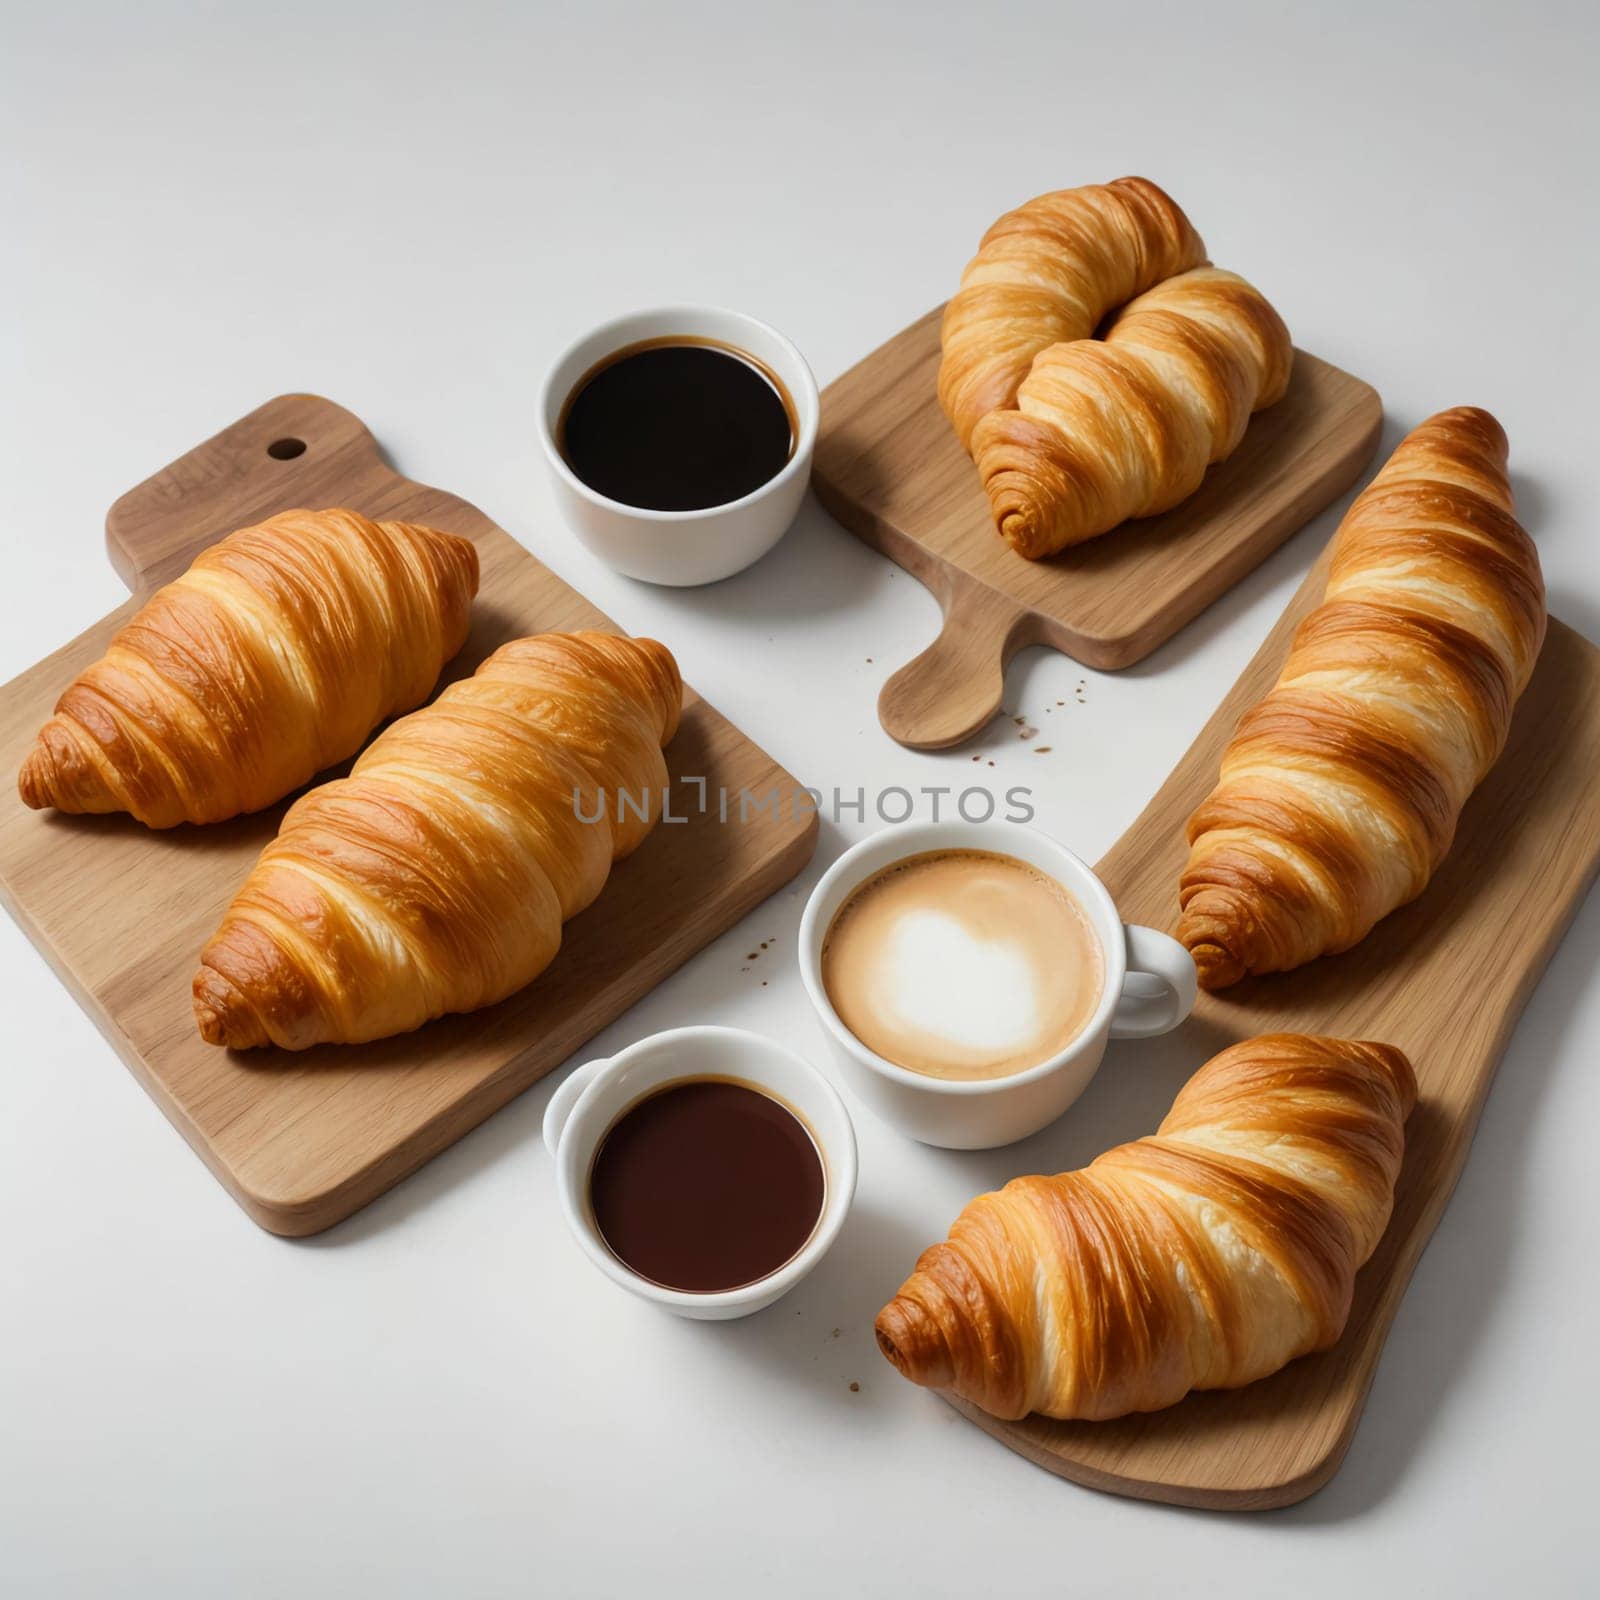 Freshly baked croissants on a wooden board on a light gray background by Севостьянов